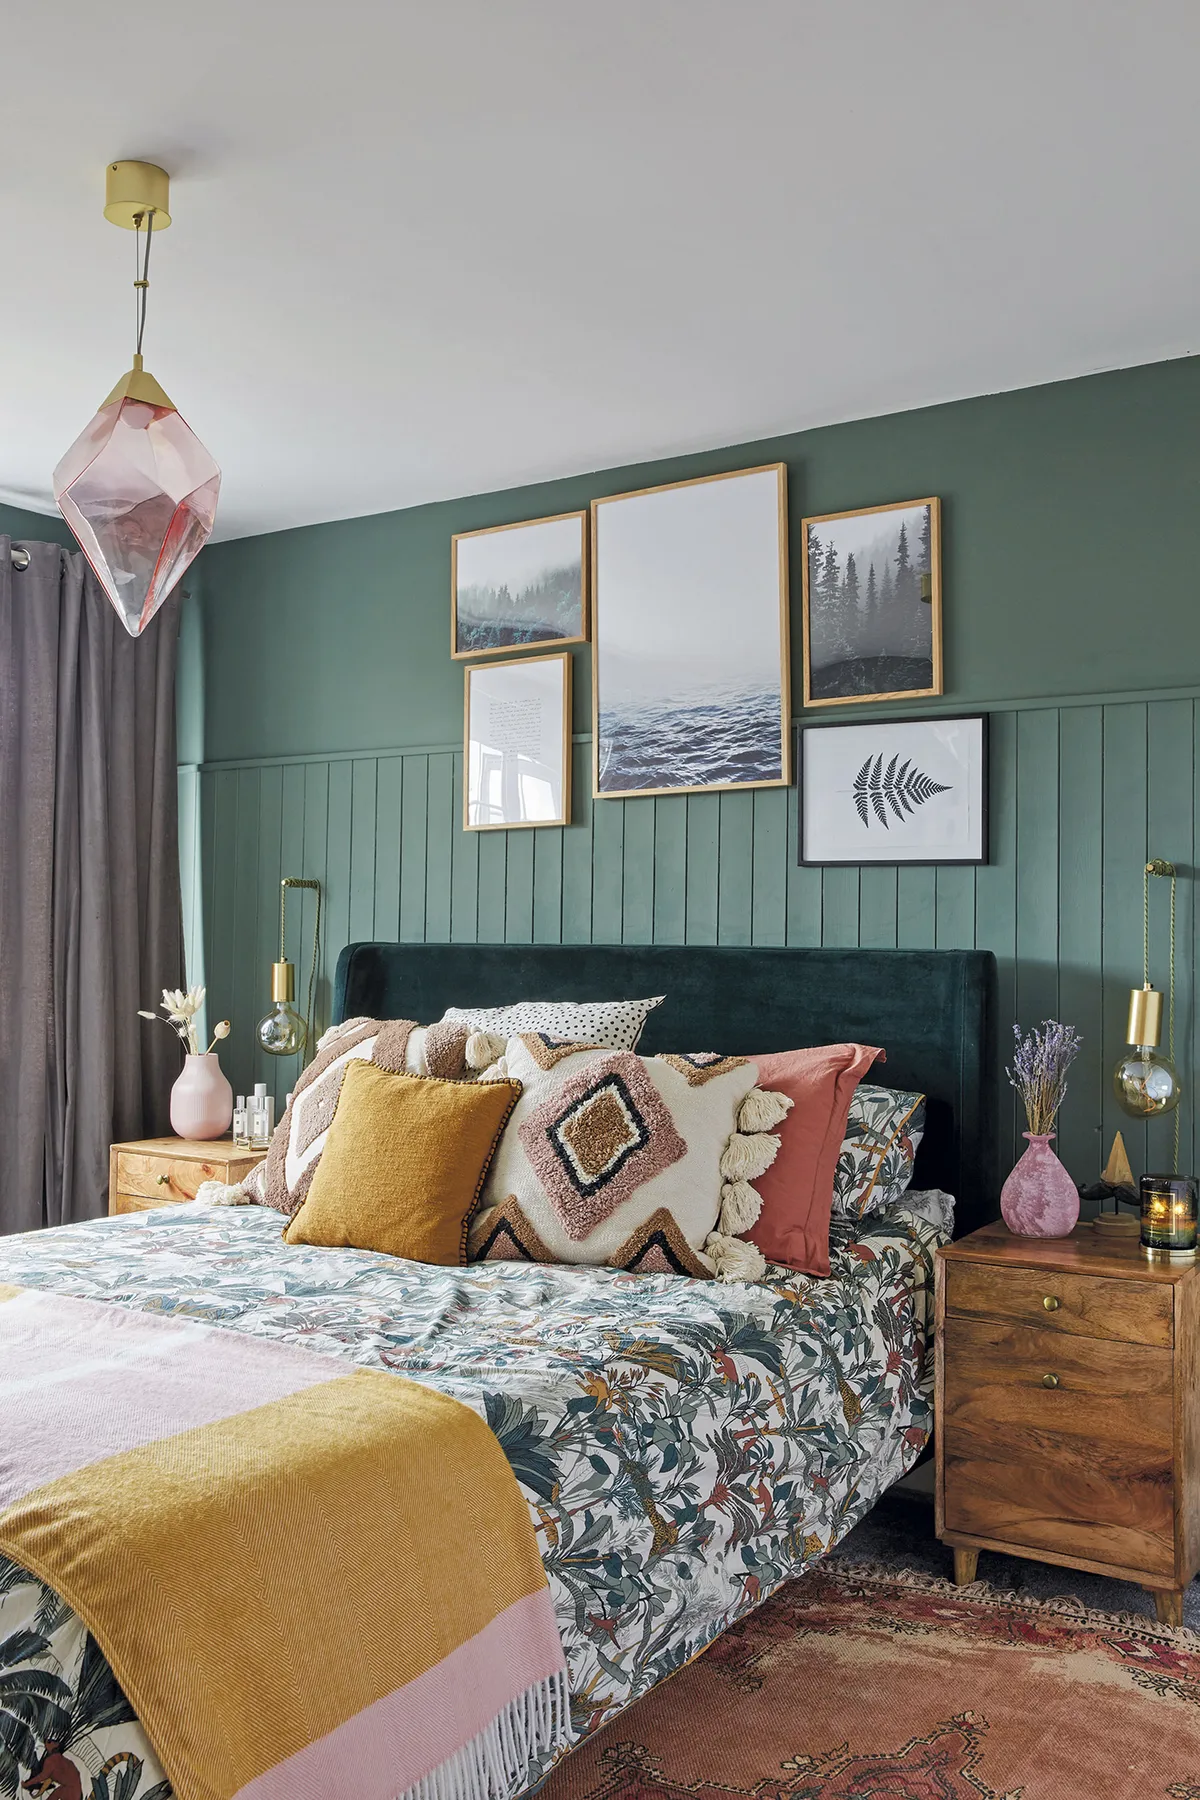 ‘I fell in love with this green shade called Ho Ho Green by Little Greene and knew I wanted to try it in our bedroom. We put in the panelling before and left the wardrobe white to add balance. I didn’t want it to feel gloomy so chose brightly patterned bedding and cushions from La Redoute’